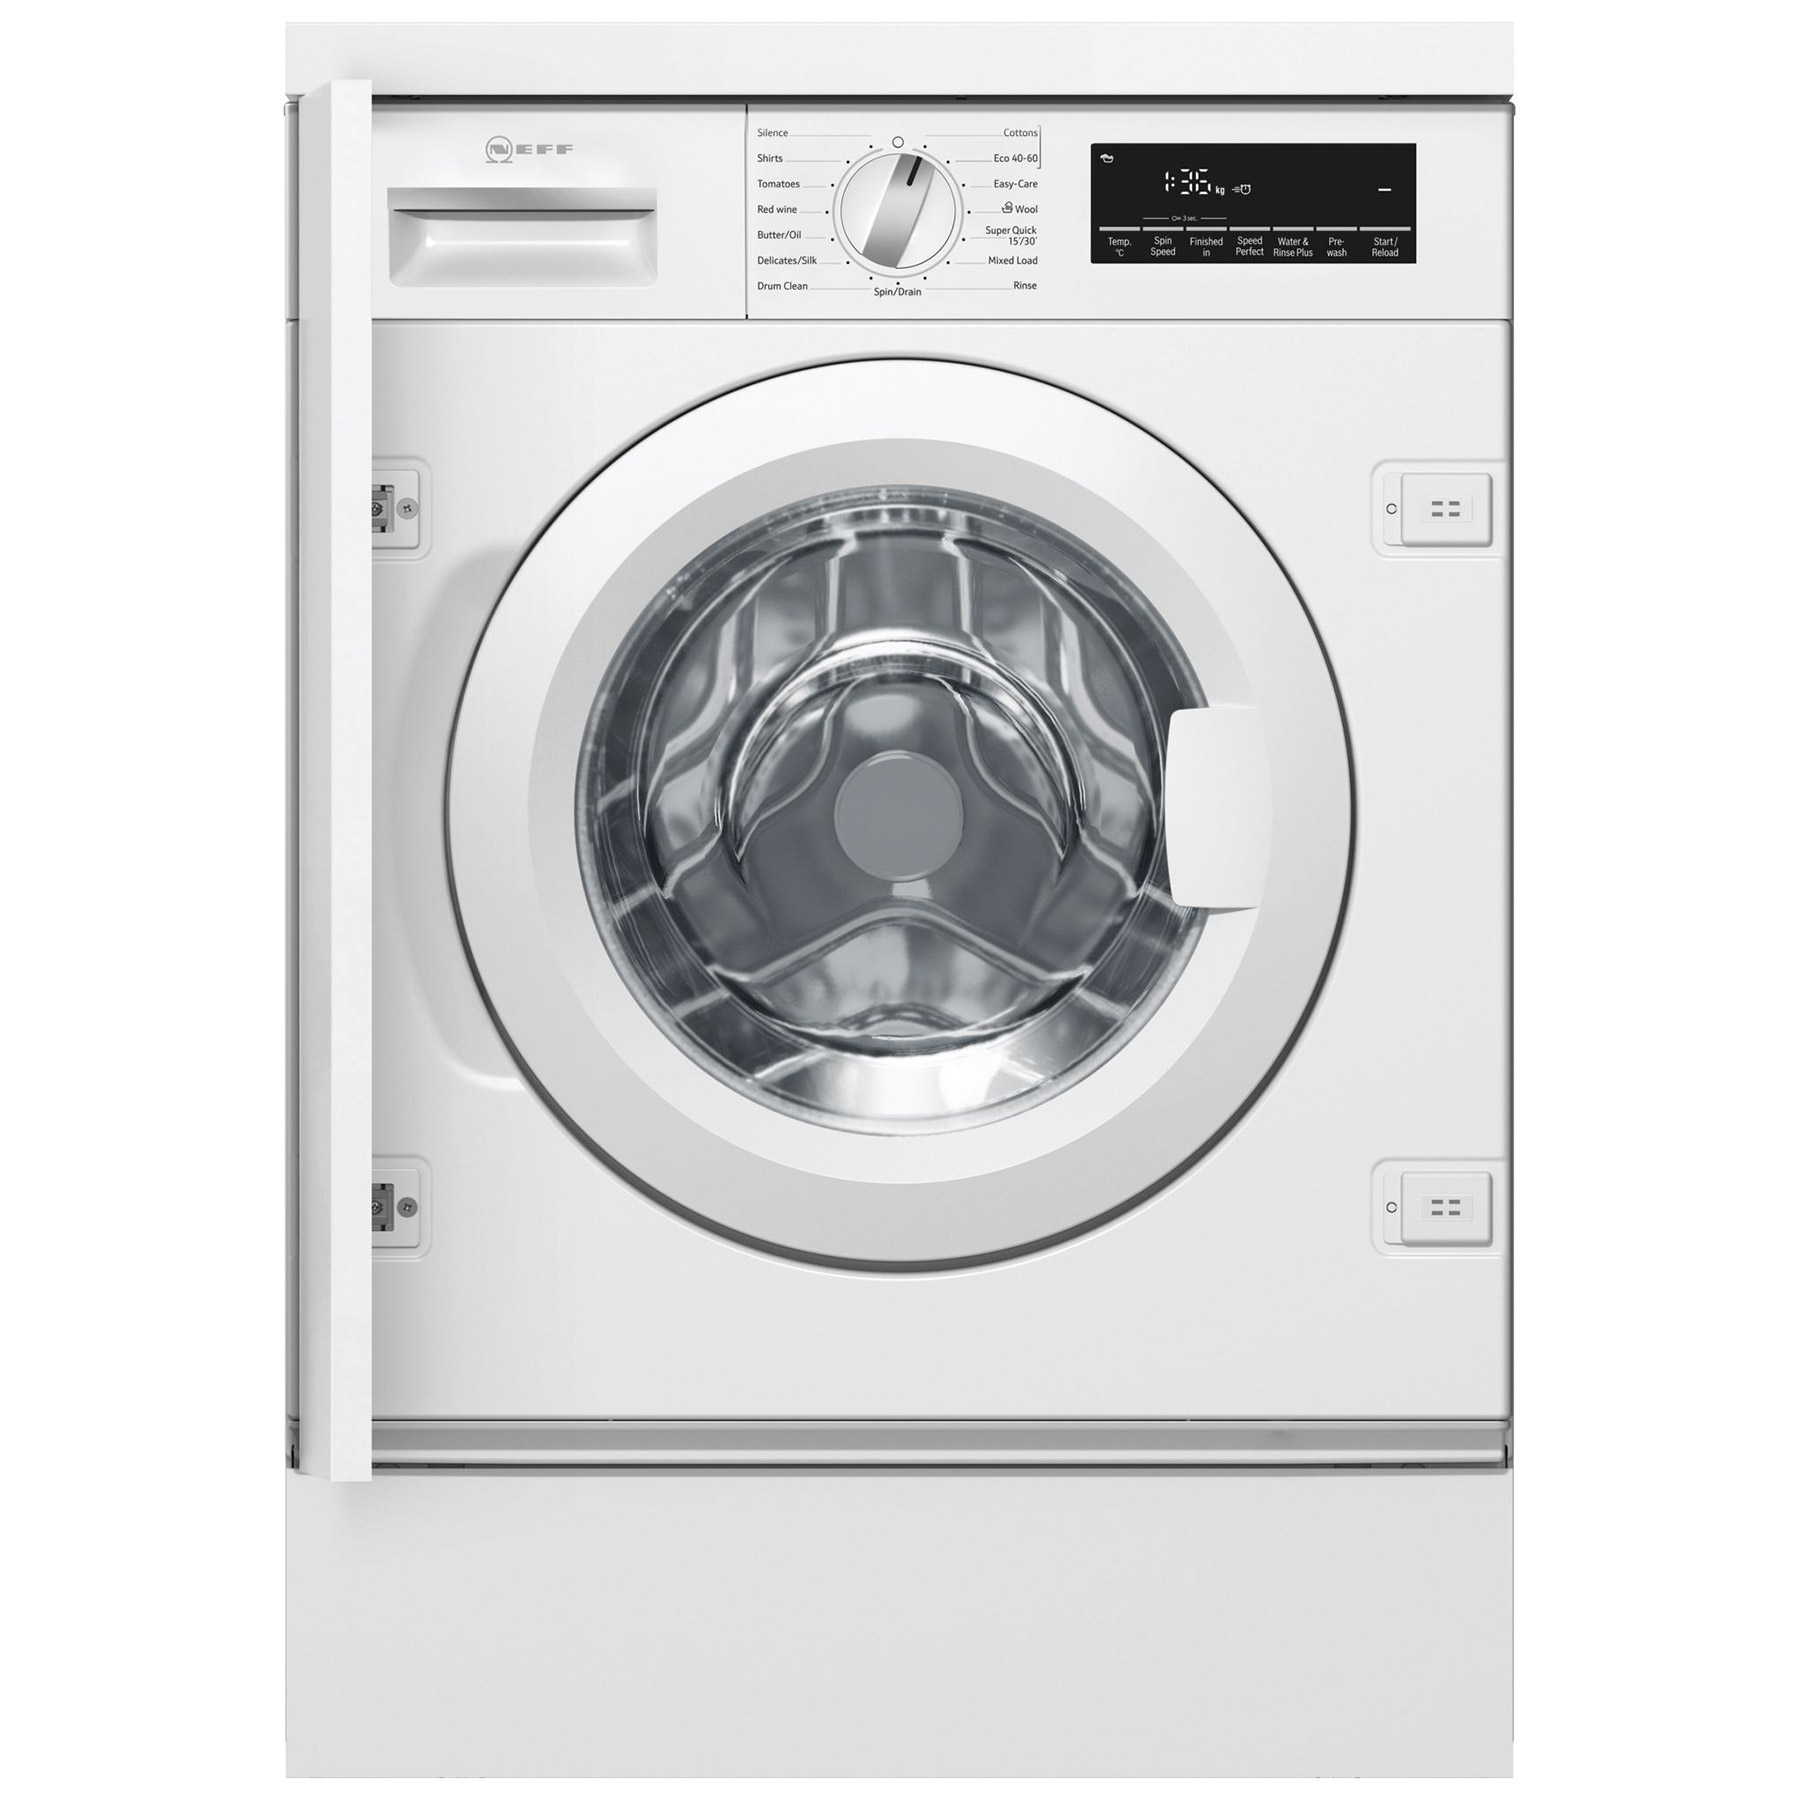 Image of Neff W544BX2GB Integrated Washing Machine 1400rpm 8kg C Rated